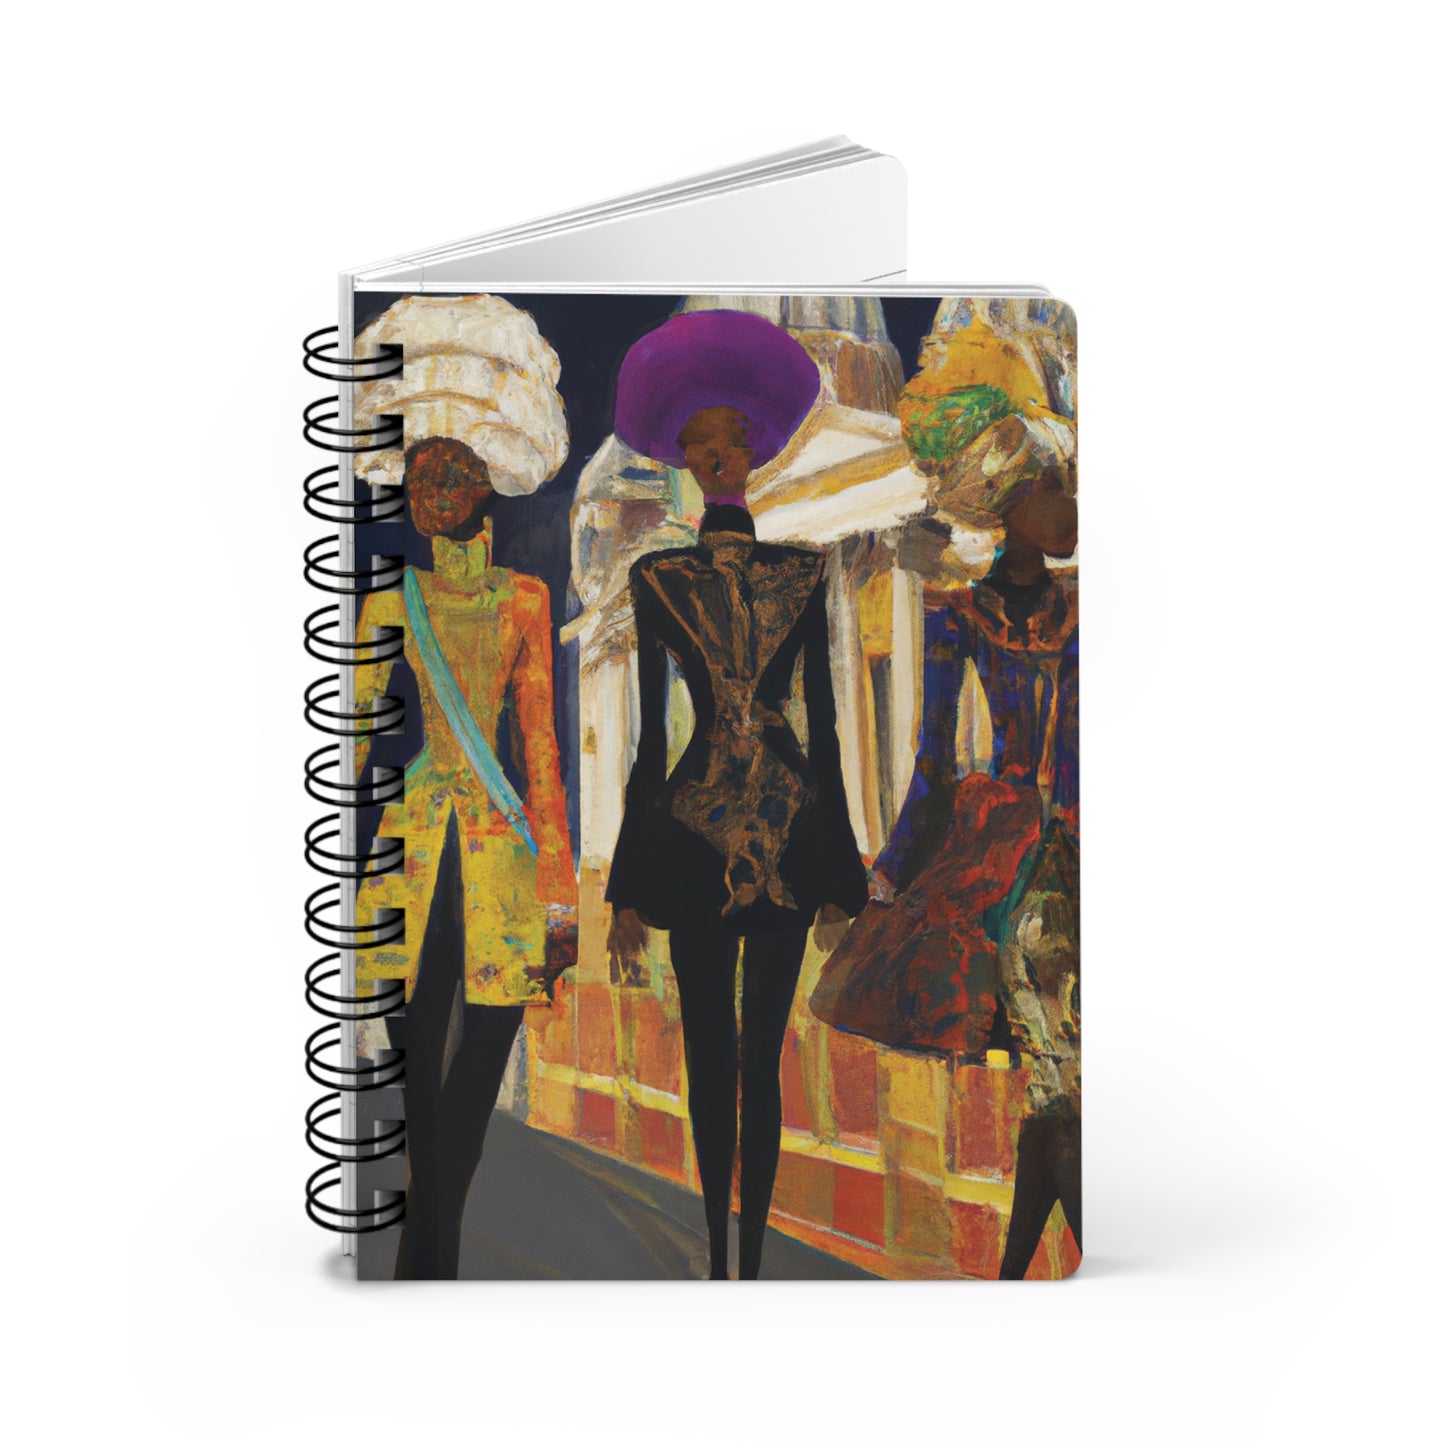 I'm That Girl Spiral Notebooks and Journals with 2023-2024 Year-at-a-Glance Calendar